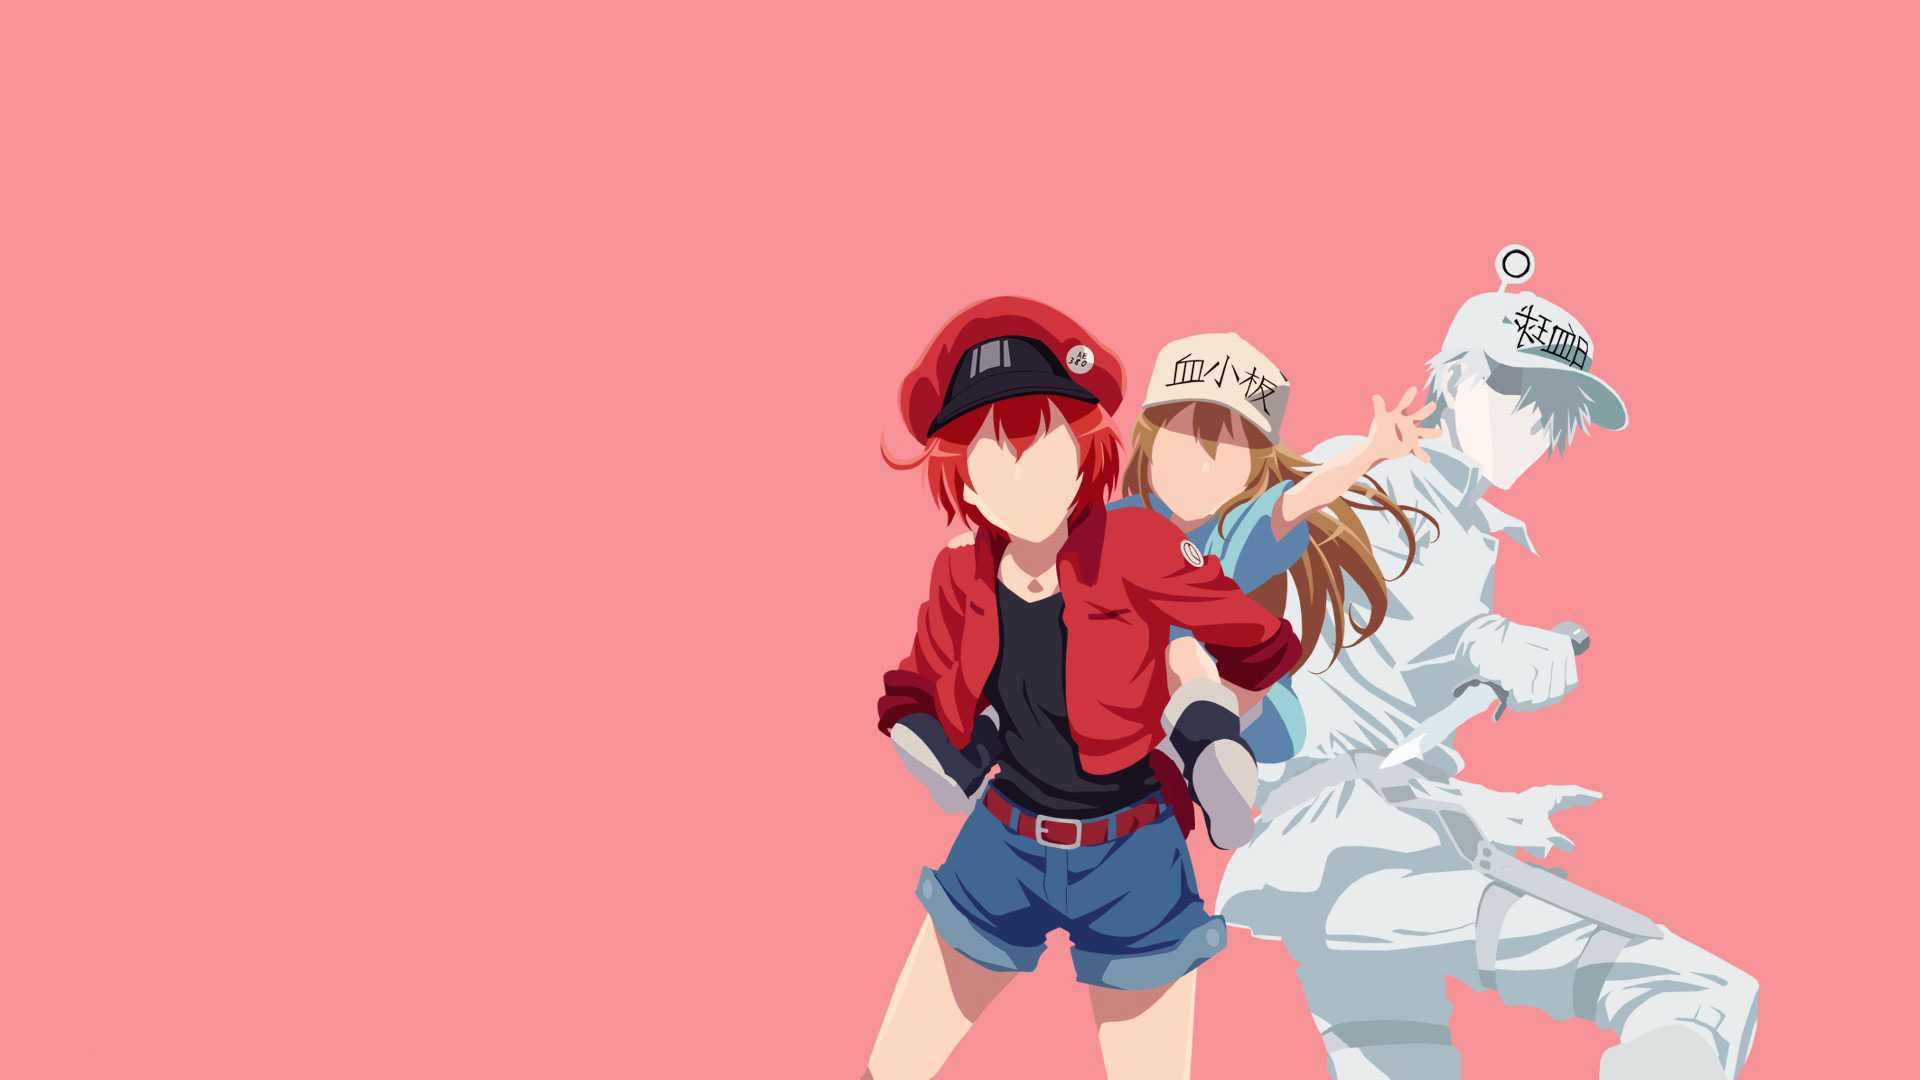 Cells At Work! Wallpapers